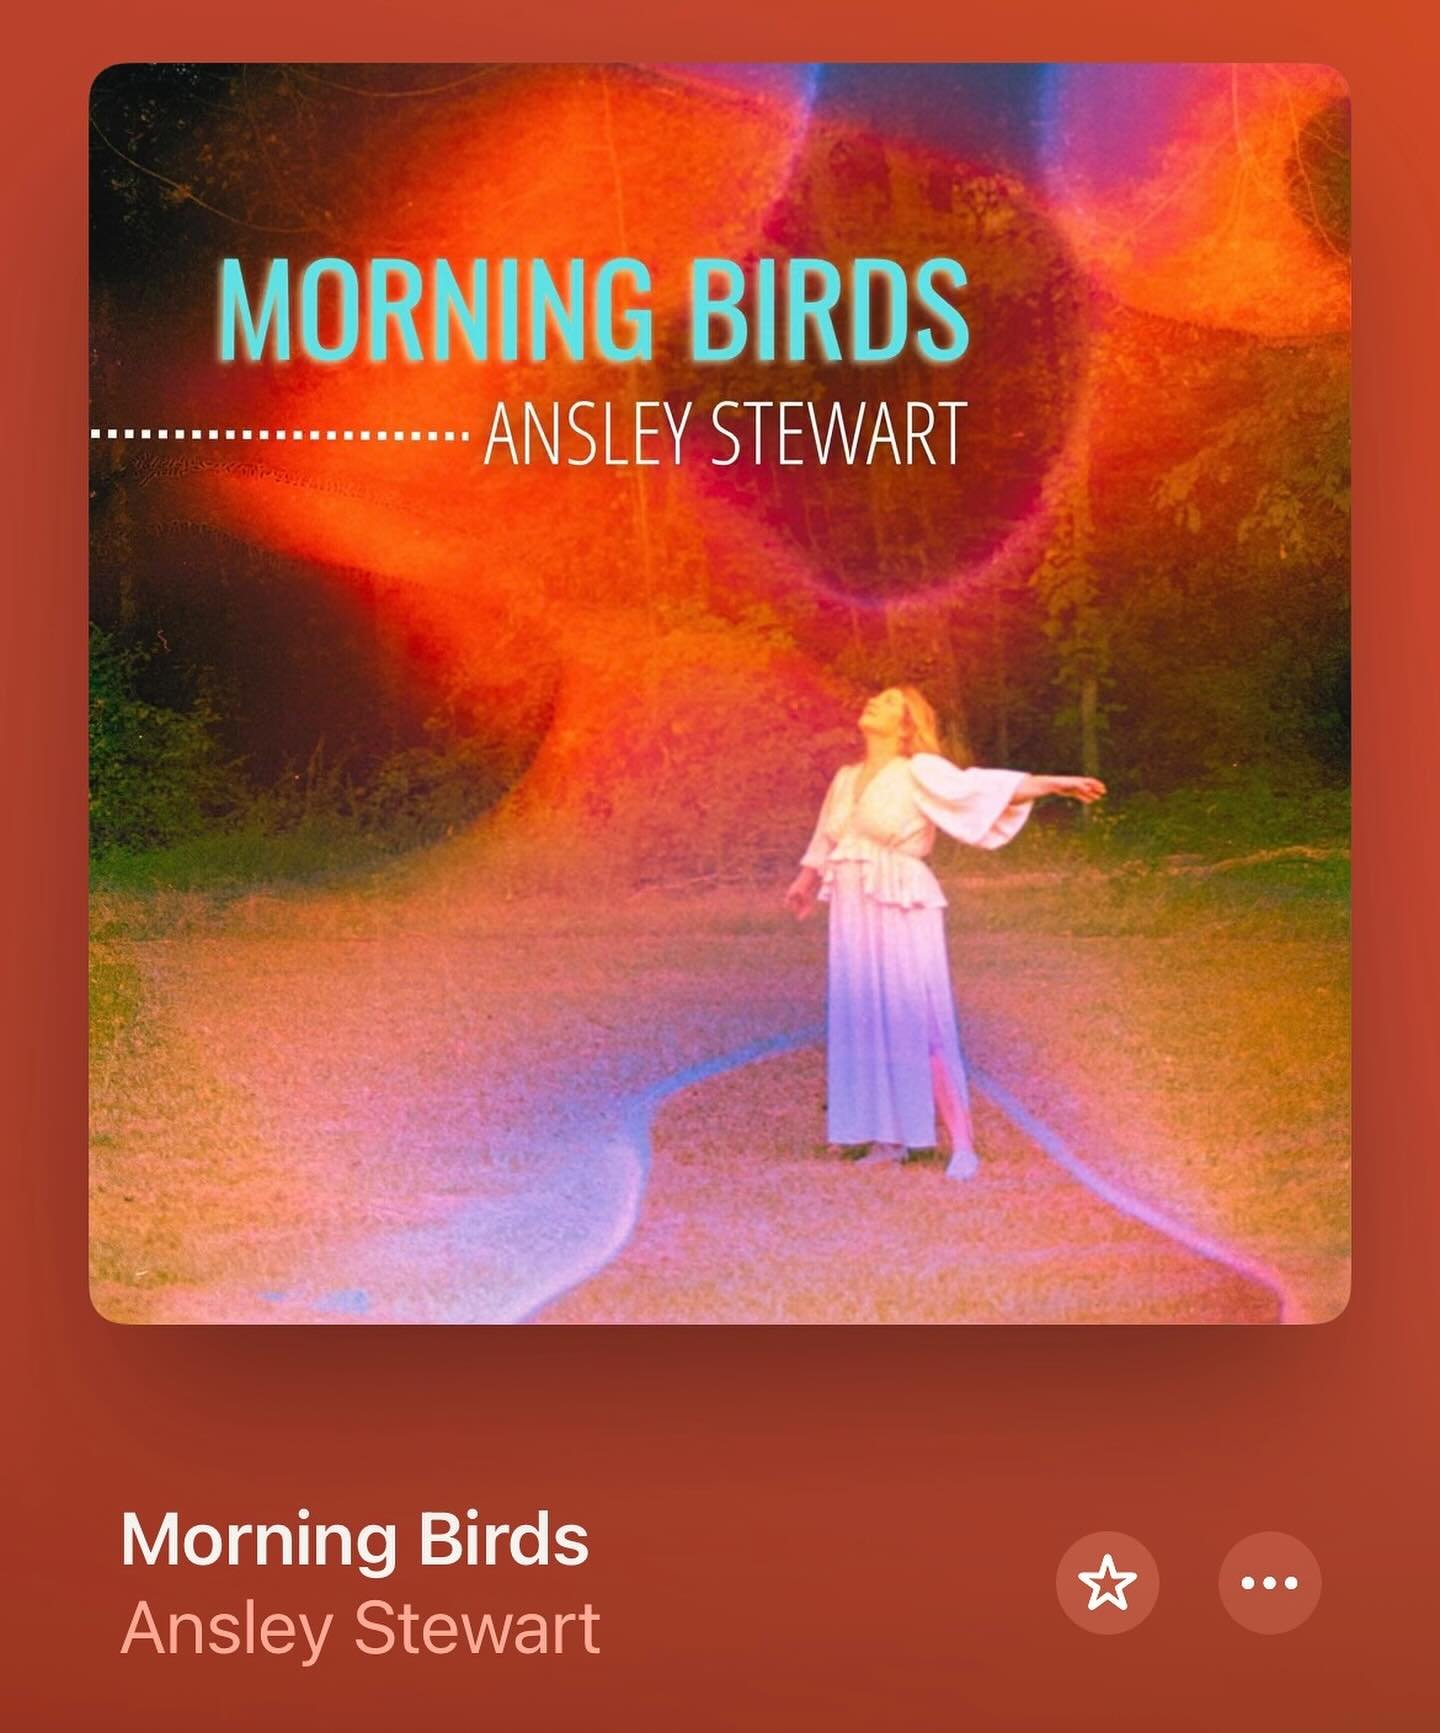 This one deserves a spot on the grid 😍🎶 As you may have seen in my Stories over the weekend, I&rsquo;m so excited for my friend, the amazingly talented @ansleystewartsings. Ansley just released a new single called Morning Birds and it&rsquo;s SO GO